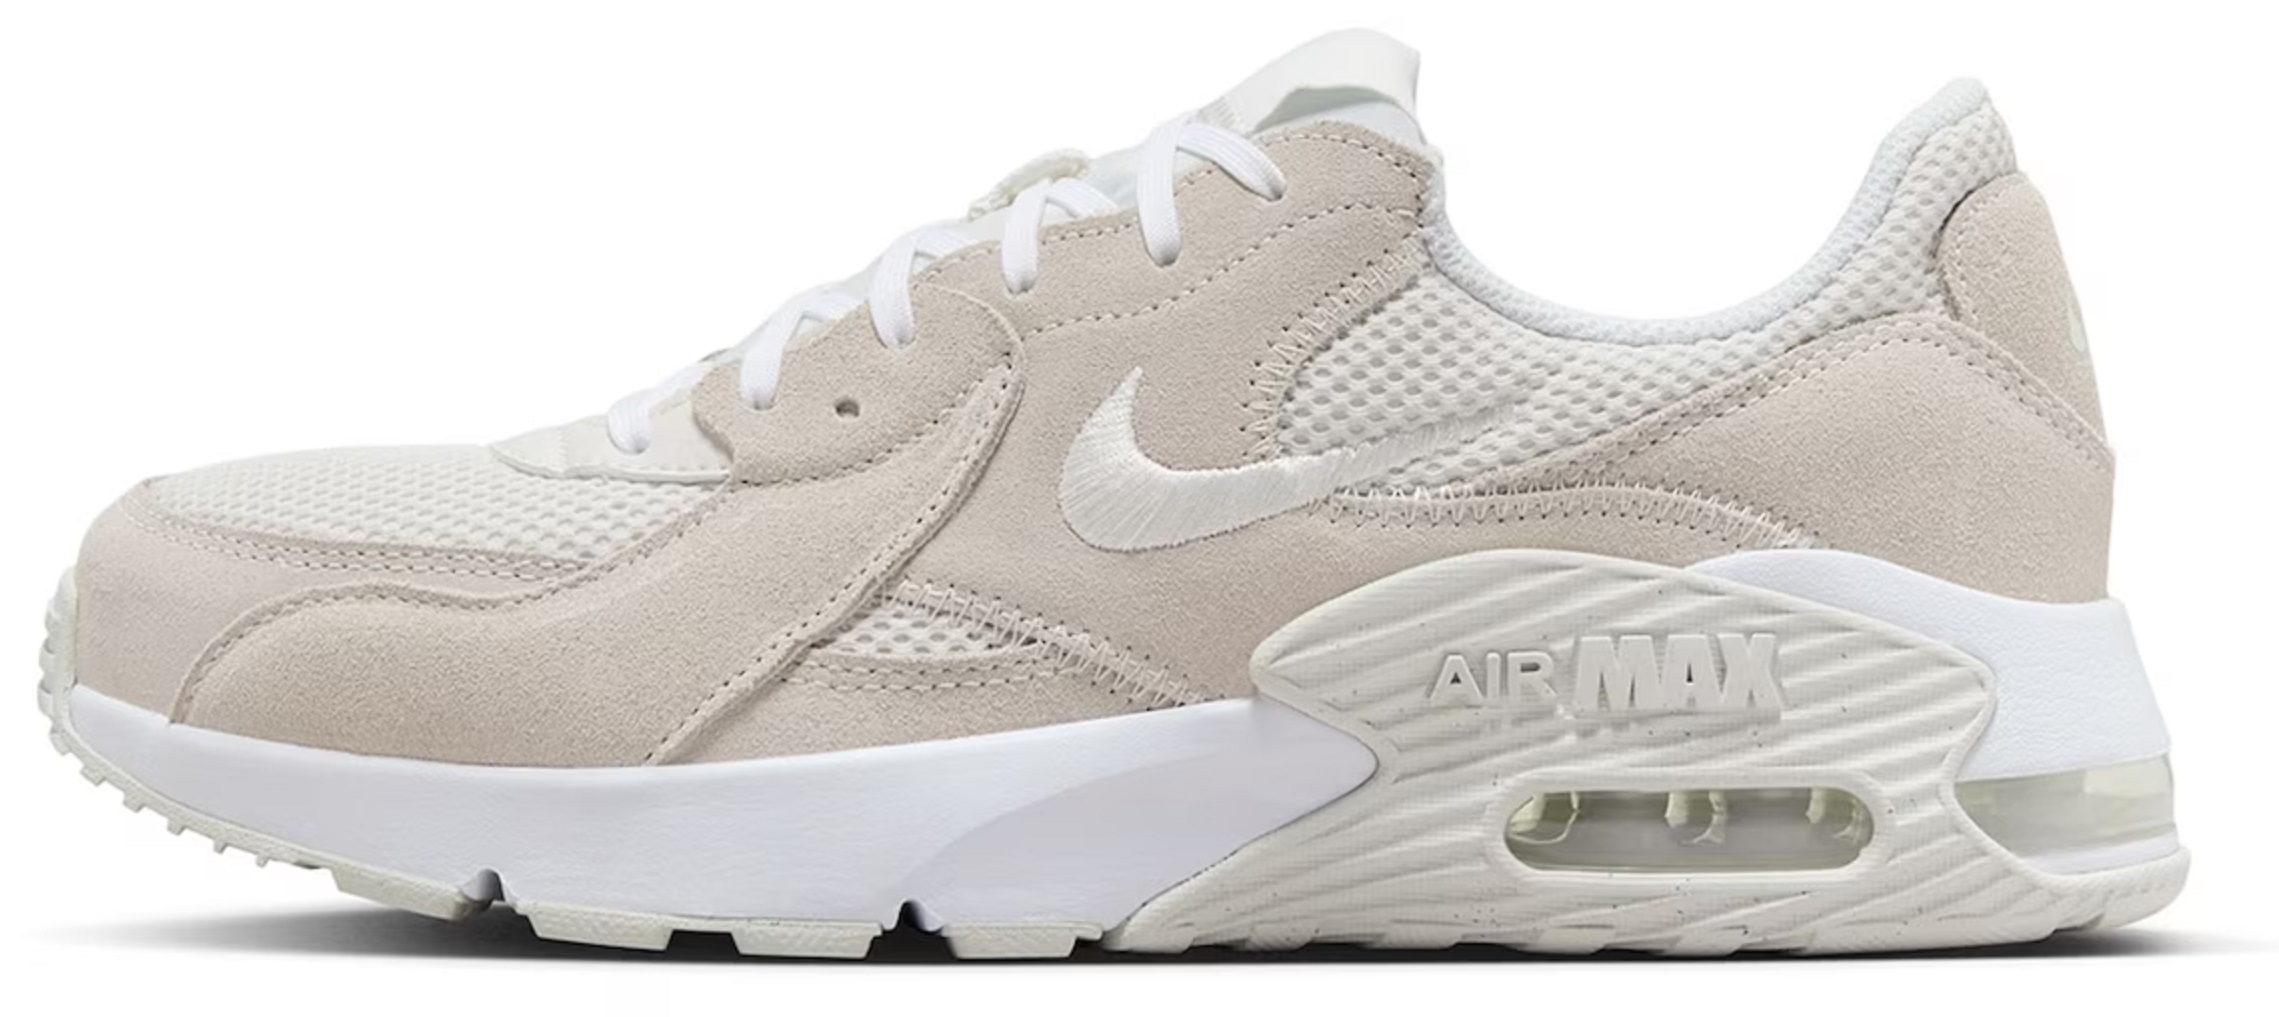 Nike Women's Air Max Excee Lifestyle Shoe